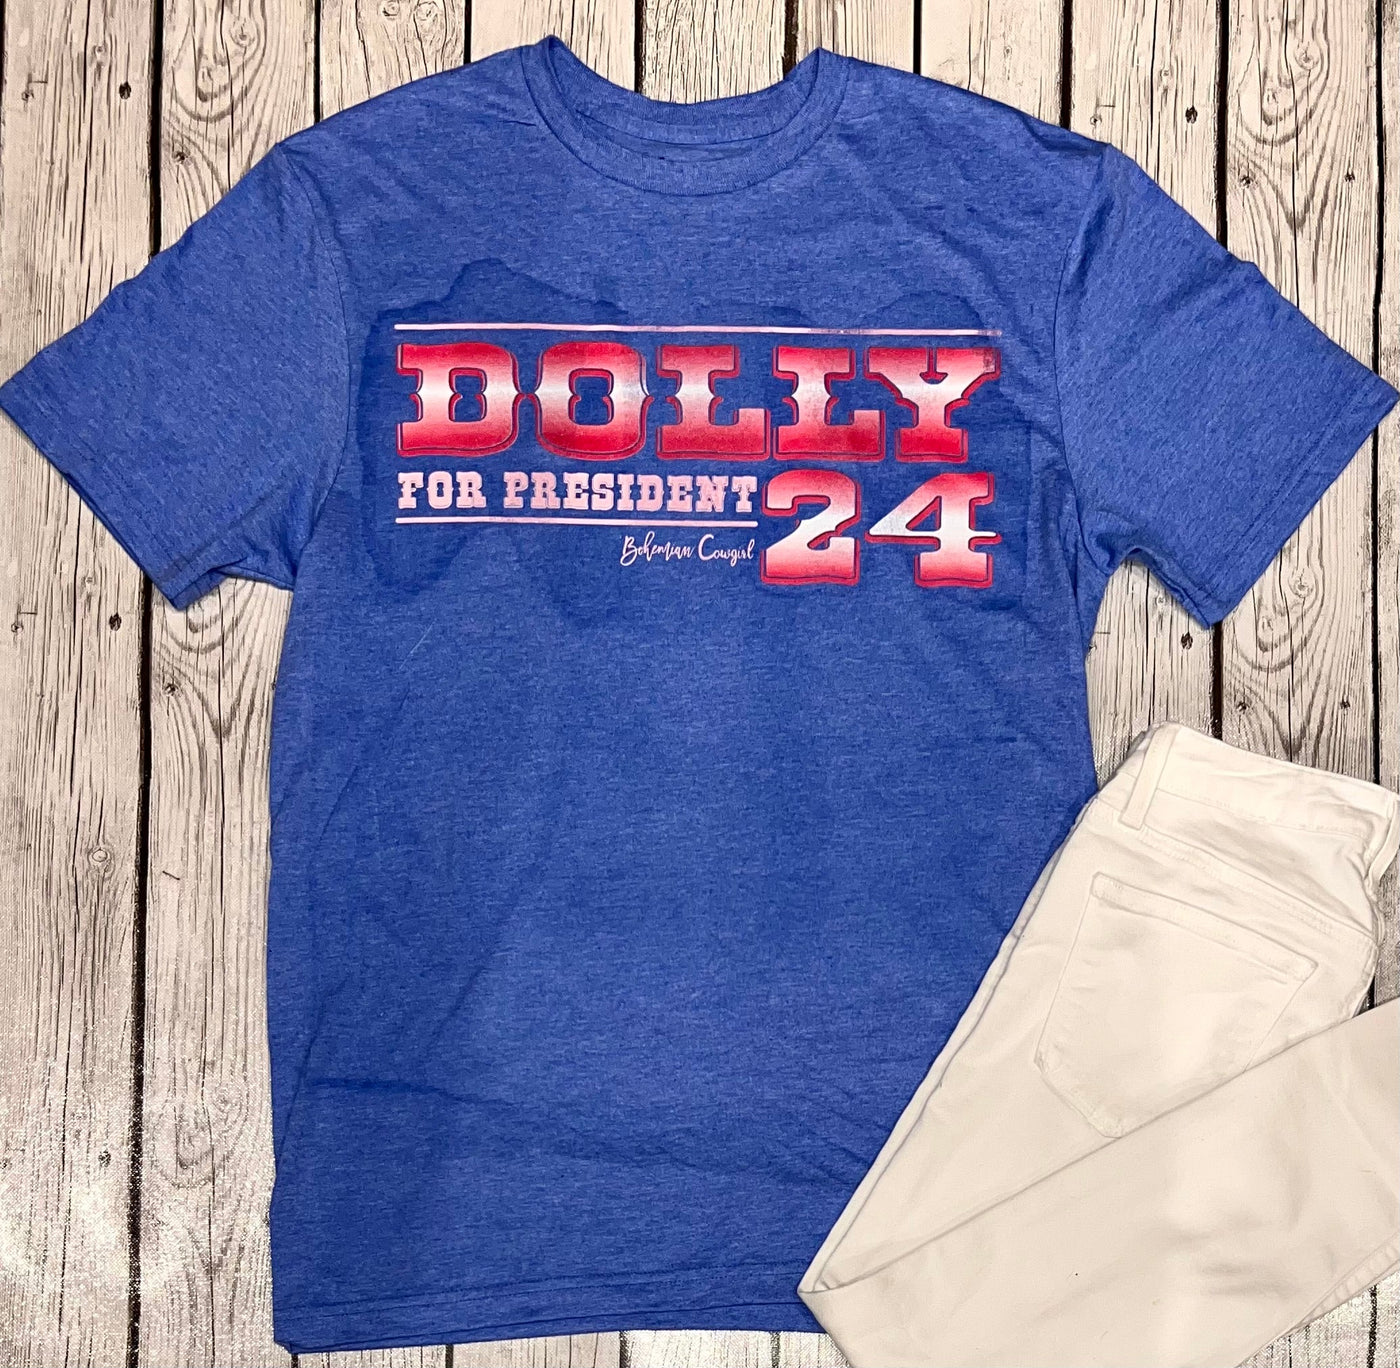 Dolly for president 24 - Wholesale